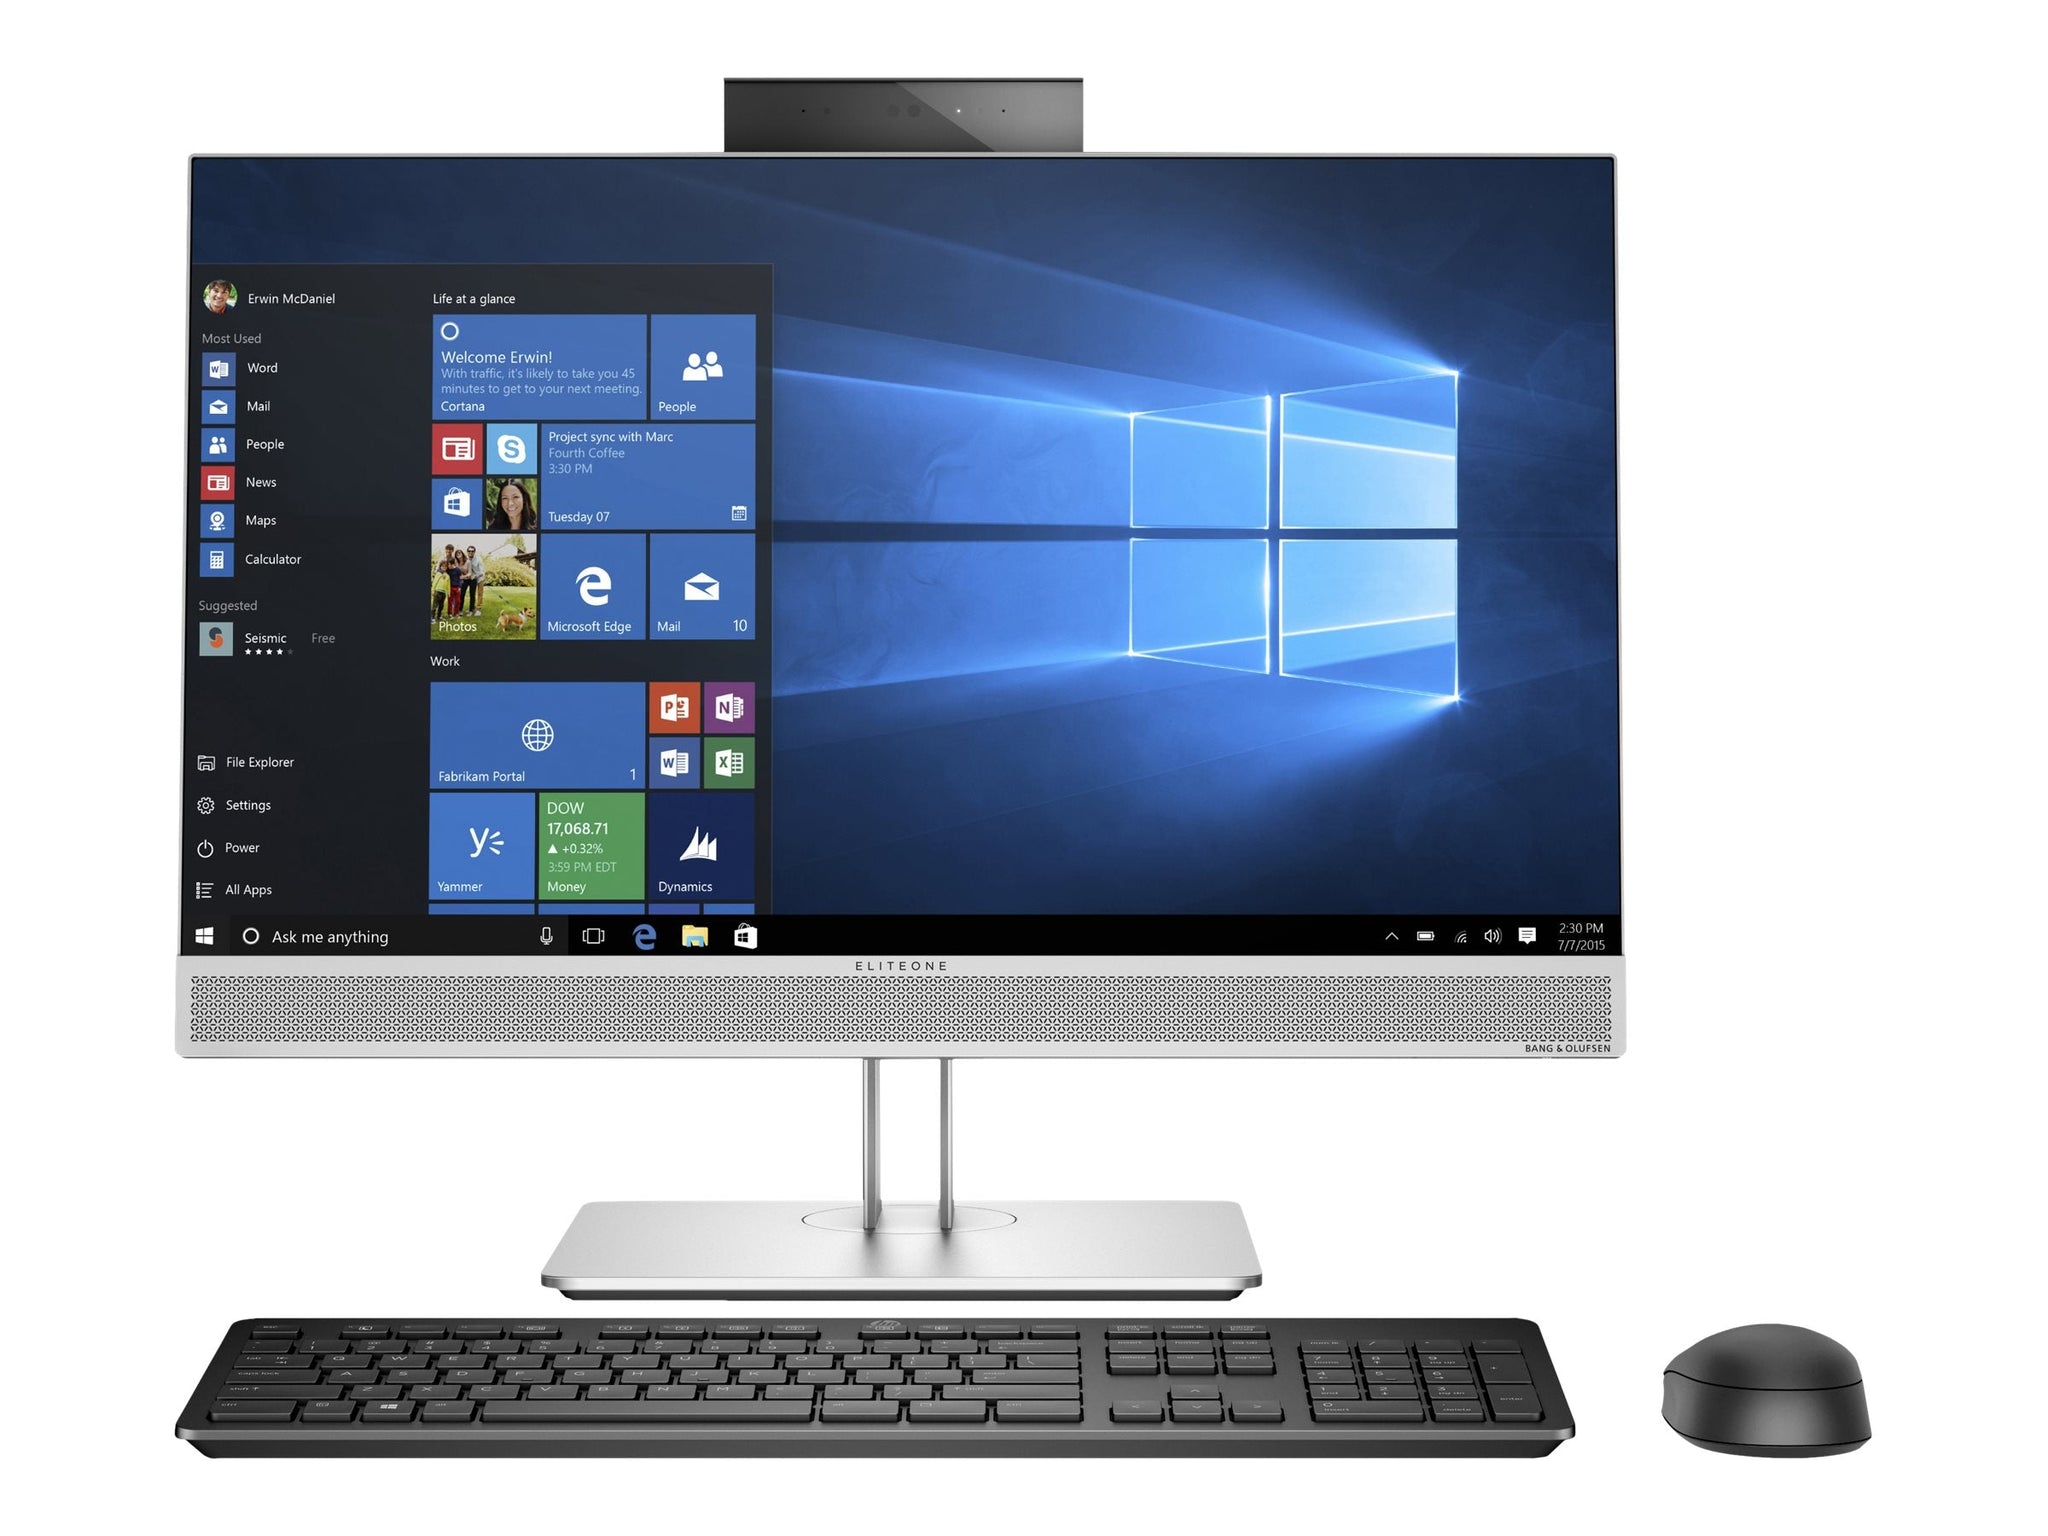 HP EliteDesk 800 G3 23.8-inch NonTouch All-in-One PC - I5-7500 8GB 1TB W10P Refurbished